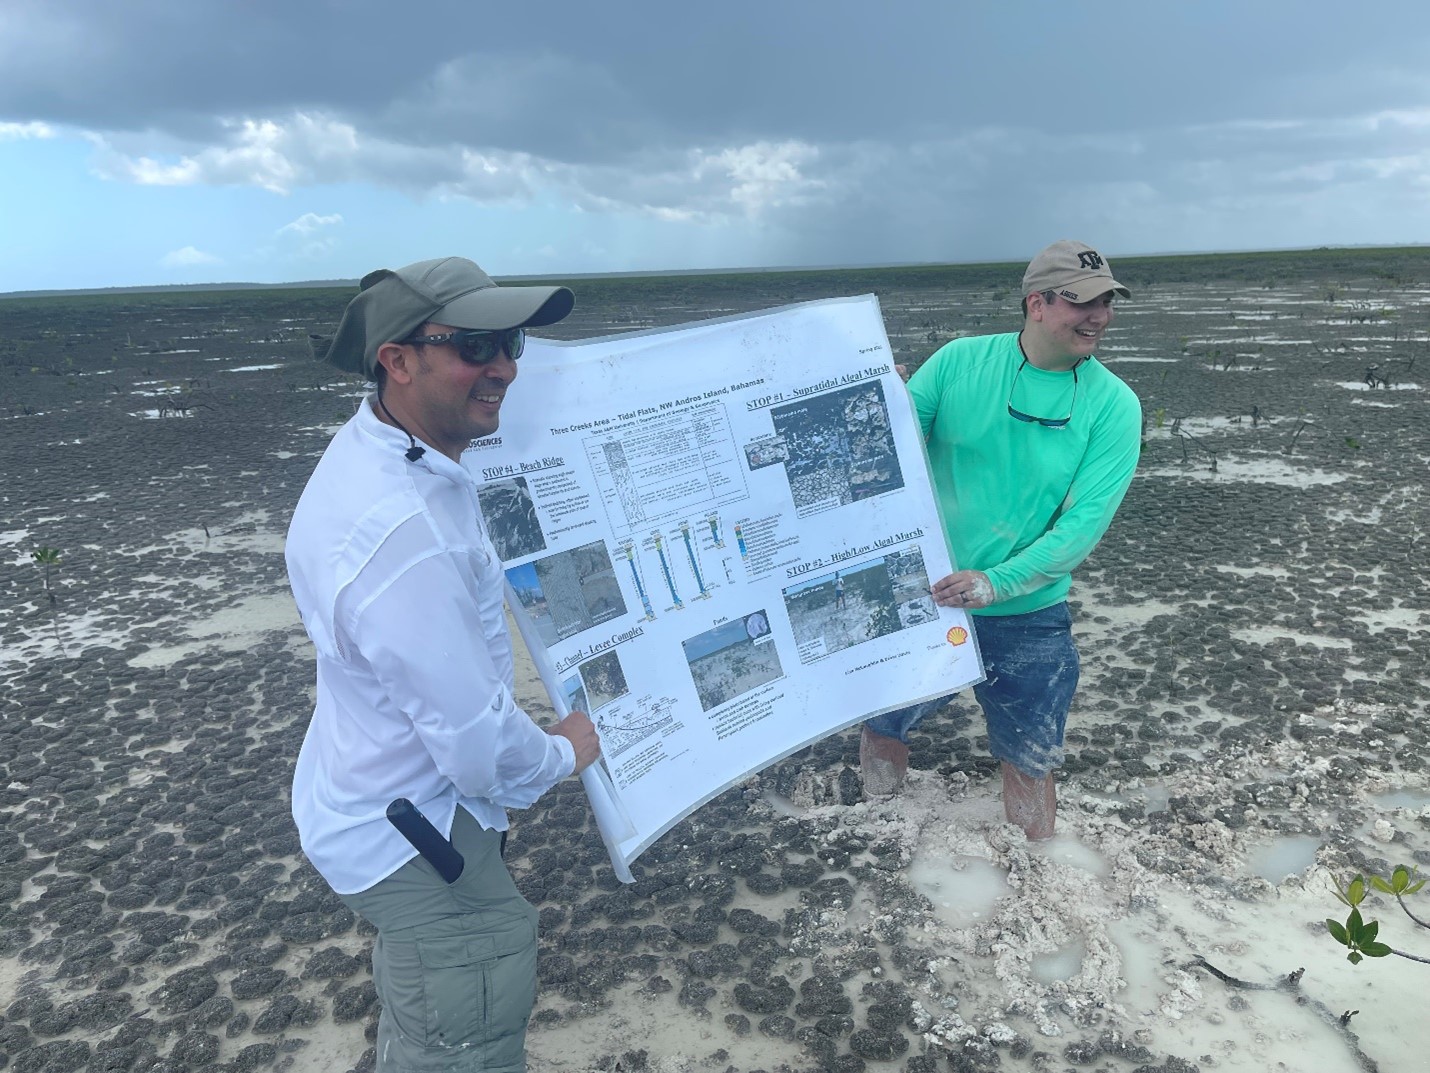 Dr. Juan Carlos Laya and Dr. Cameron Manche discuss carbonate mud deposition in the inland supratidal algal marsh on the leeward side of Andros Island. Photo by Dennis Zakowicz.